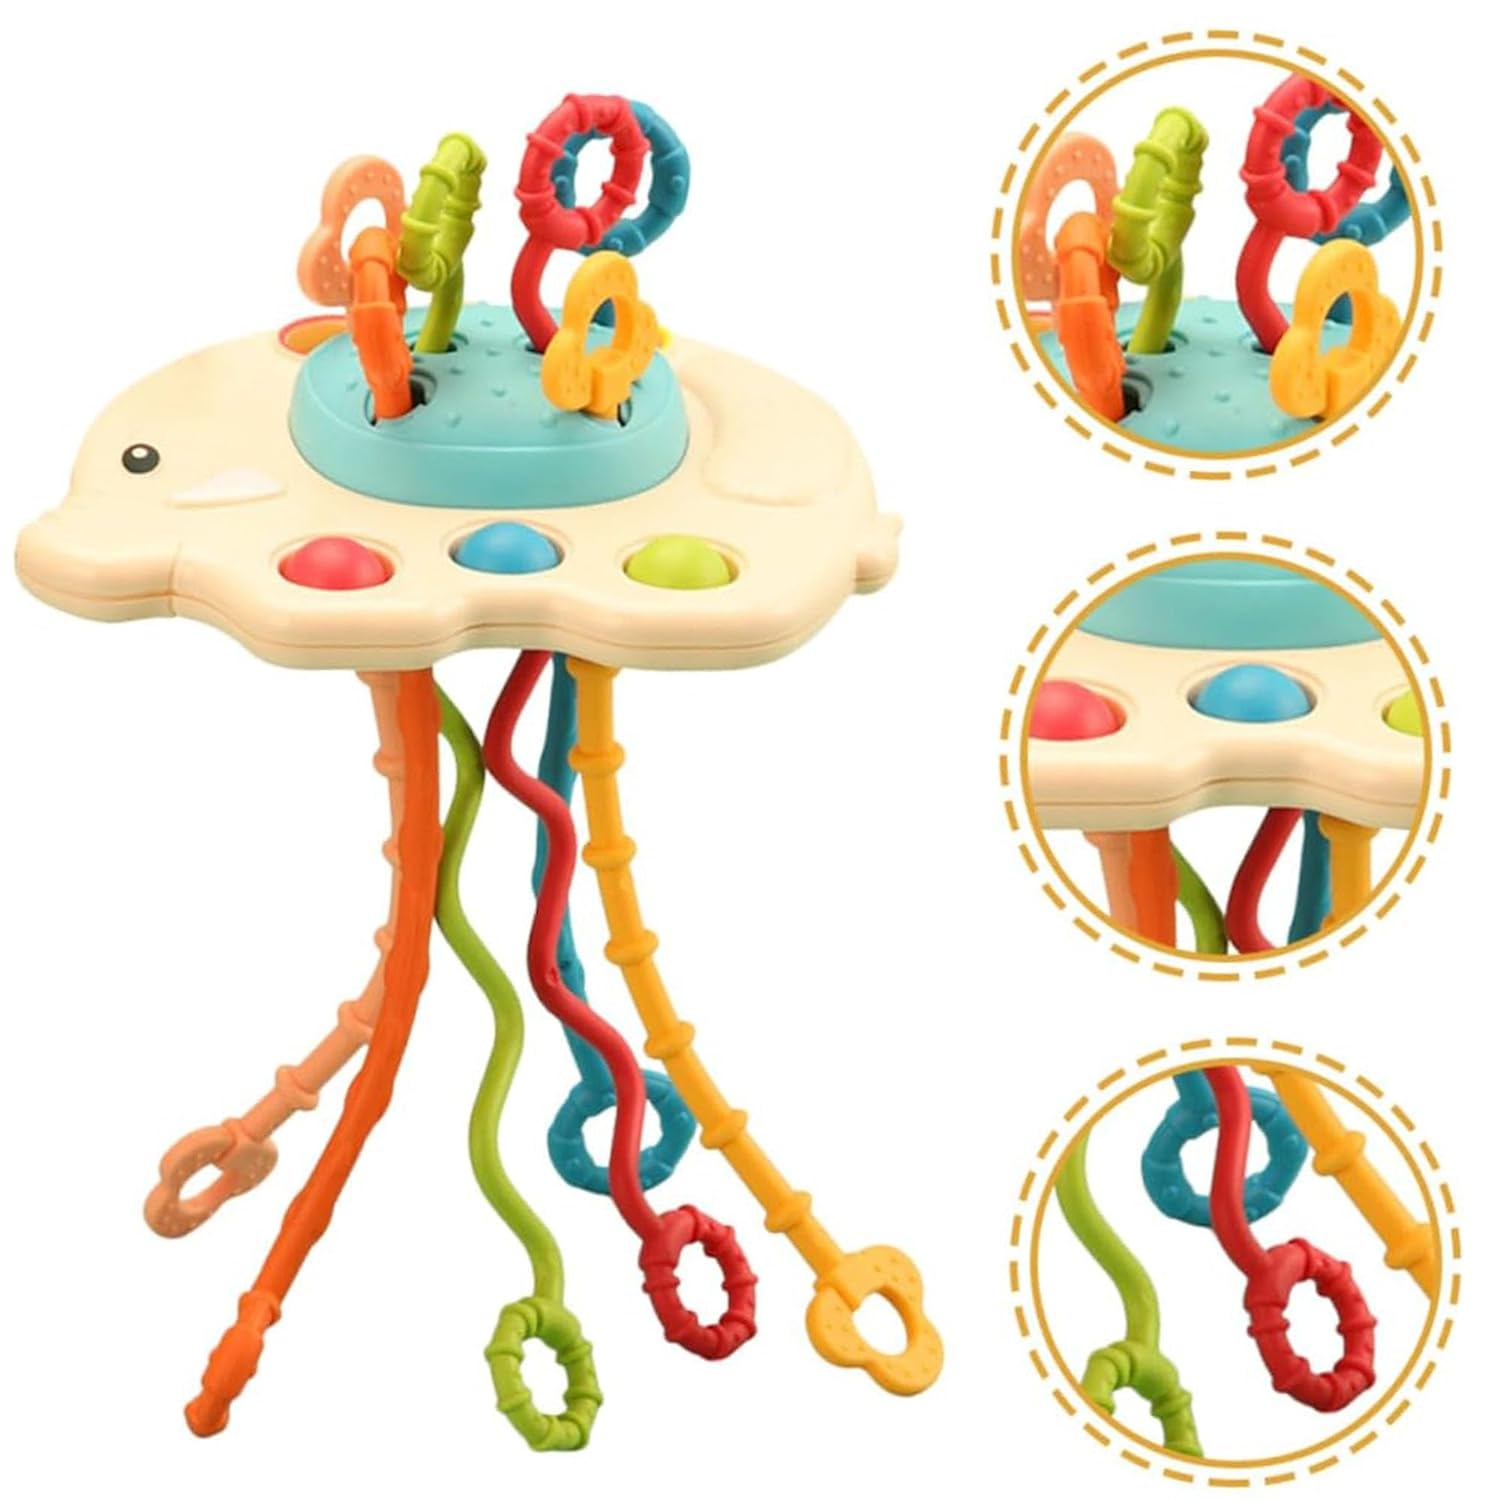 Kipa Gaming Baby Ellie Sensory Toy: Made in India, Travel-Friendly Silicone for Teething | 4+ Months